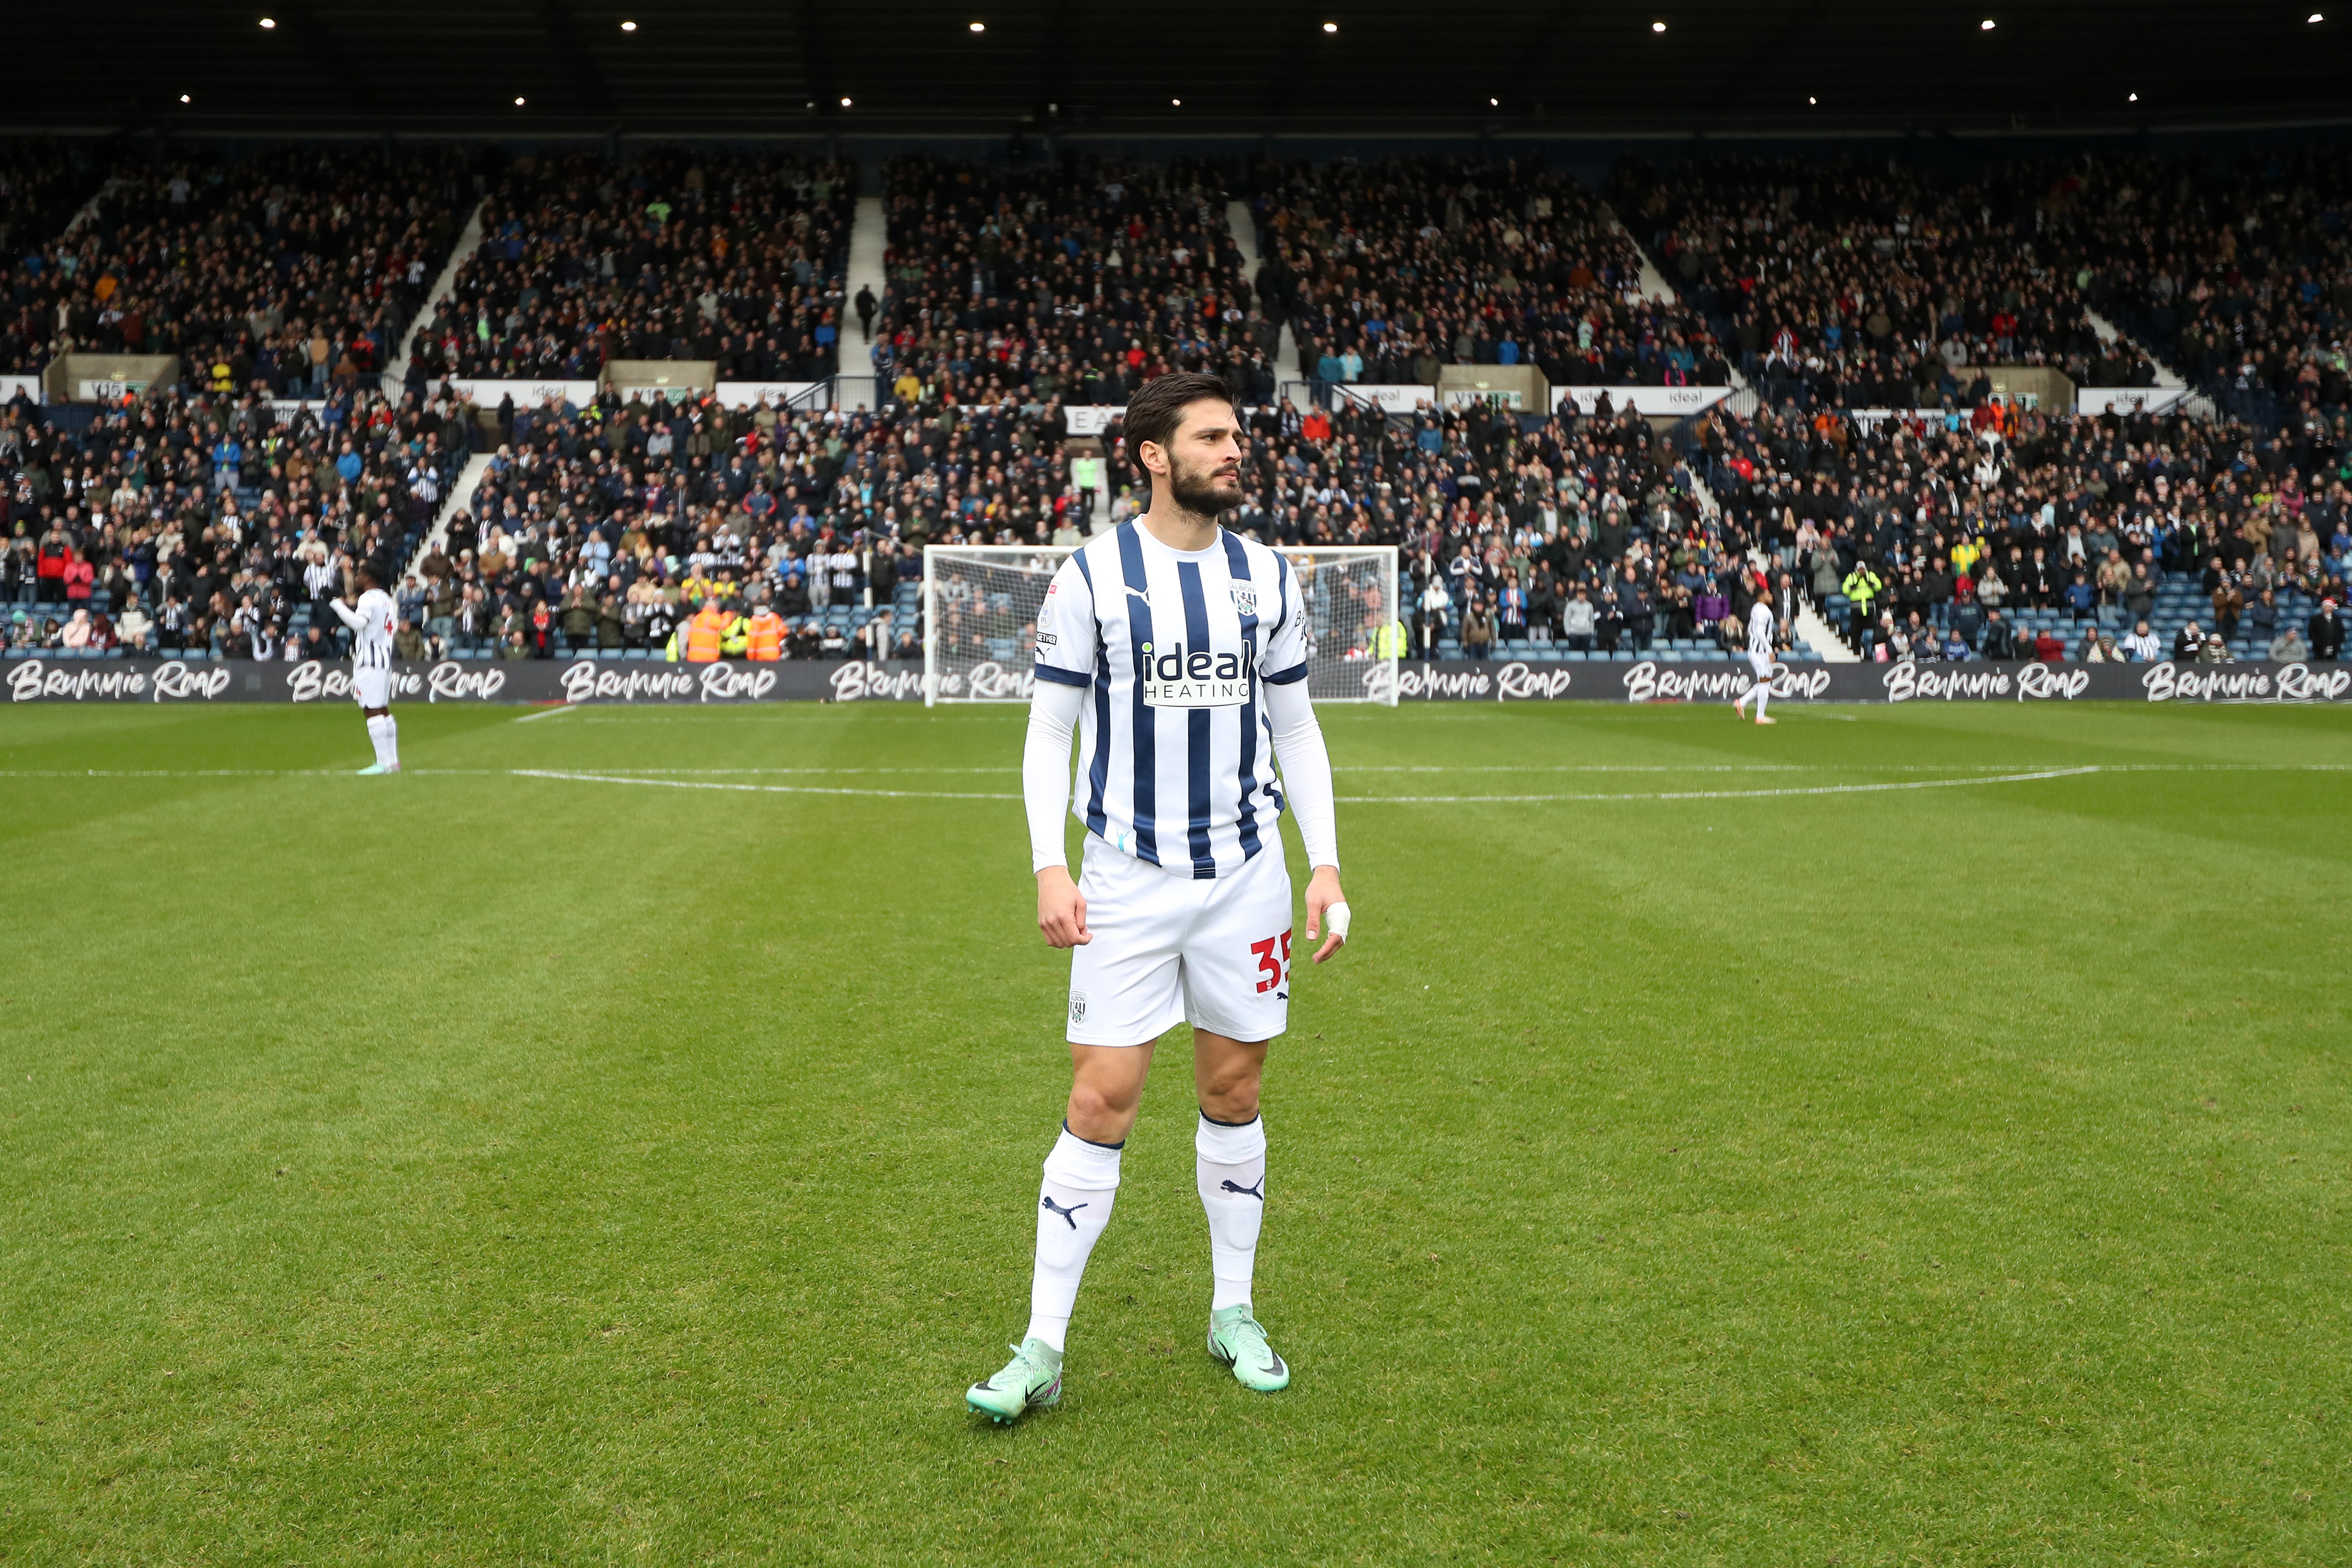 Okay Yokuslu on the pitch at The Hawthorns ahead of kick-off against Stoke